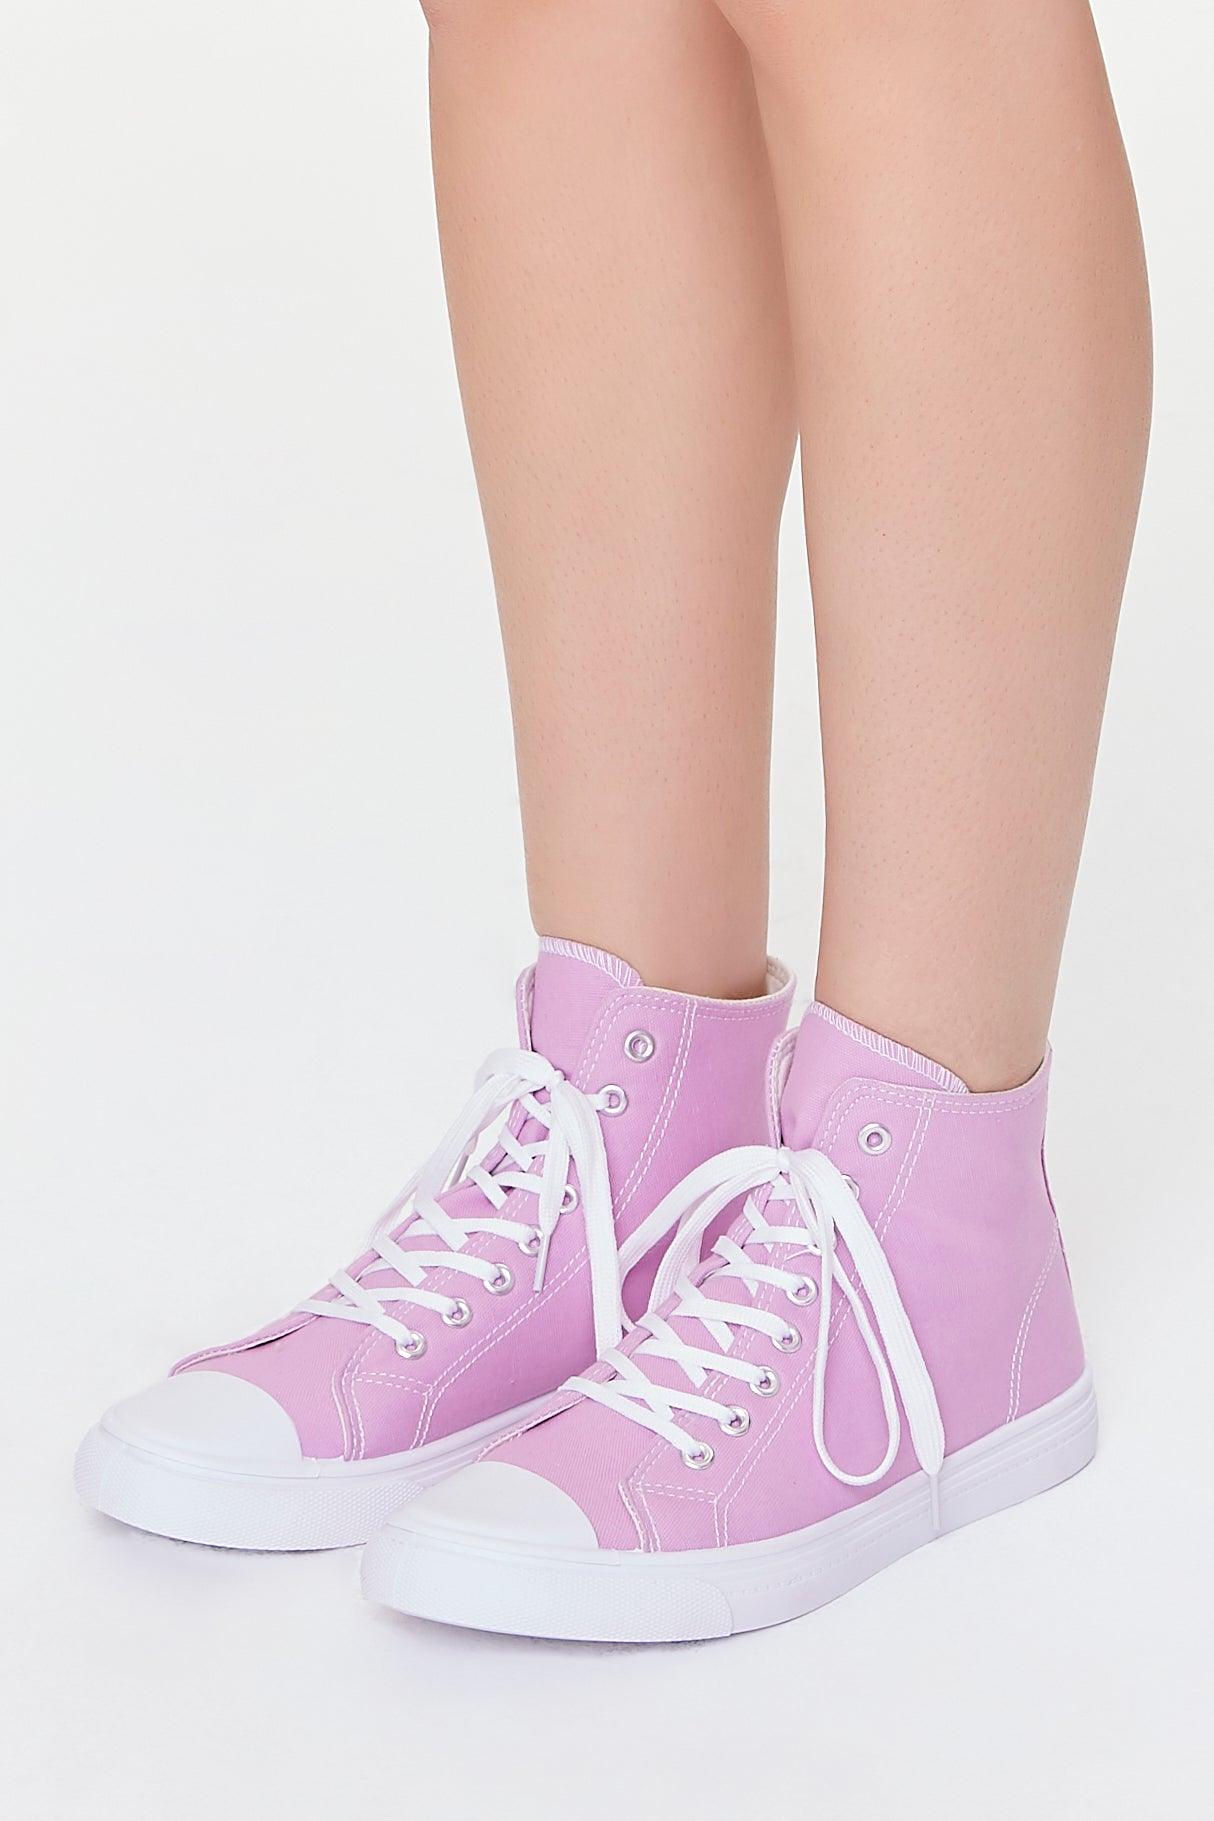 Lavender Lace-Up High-Top Sneakers 1